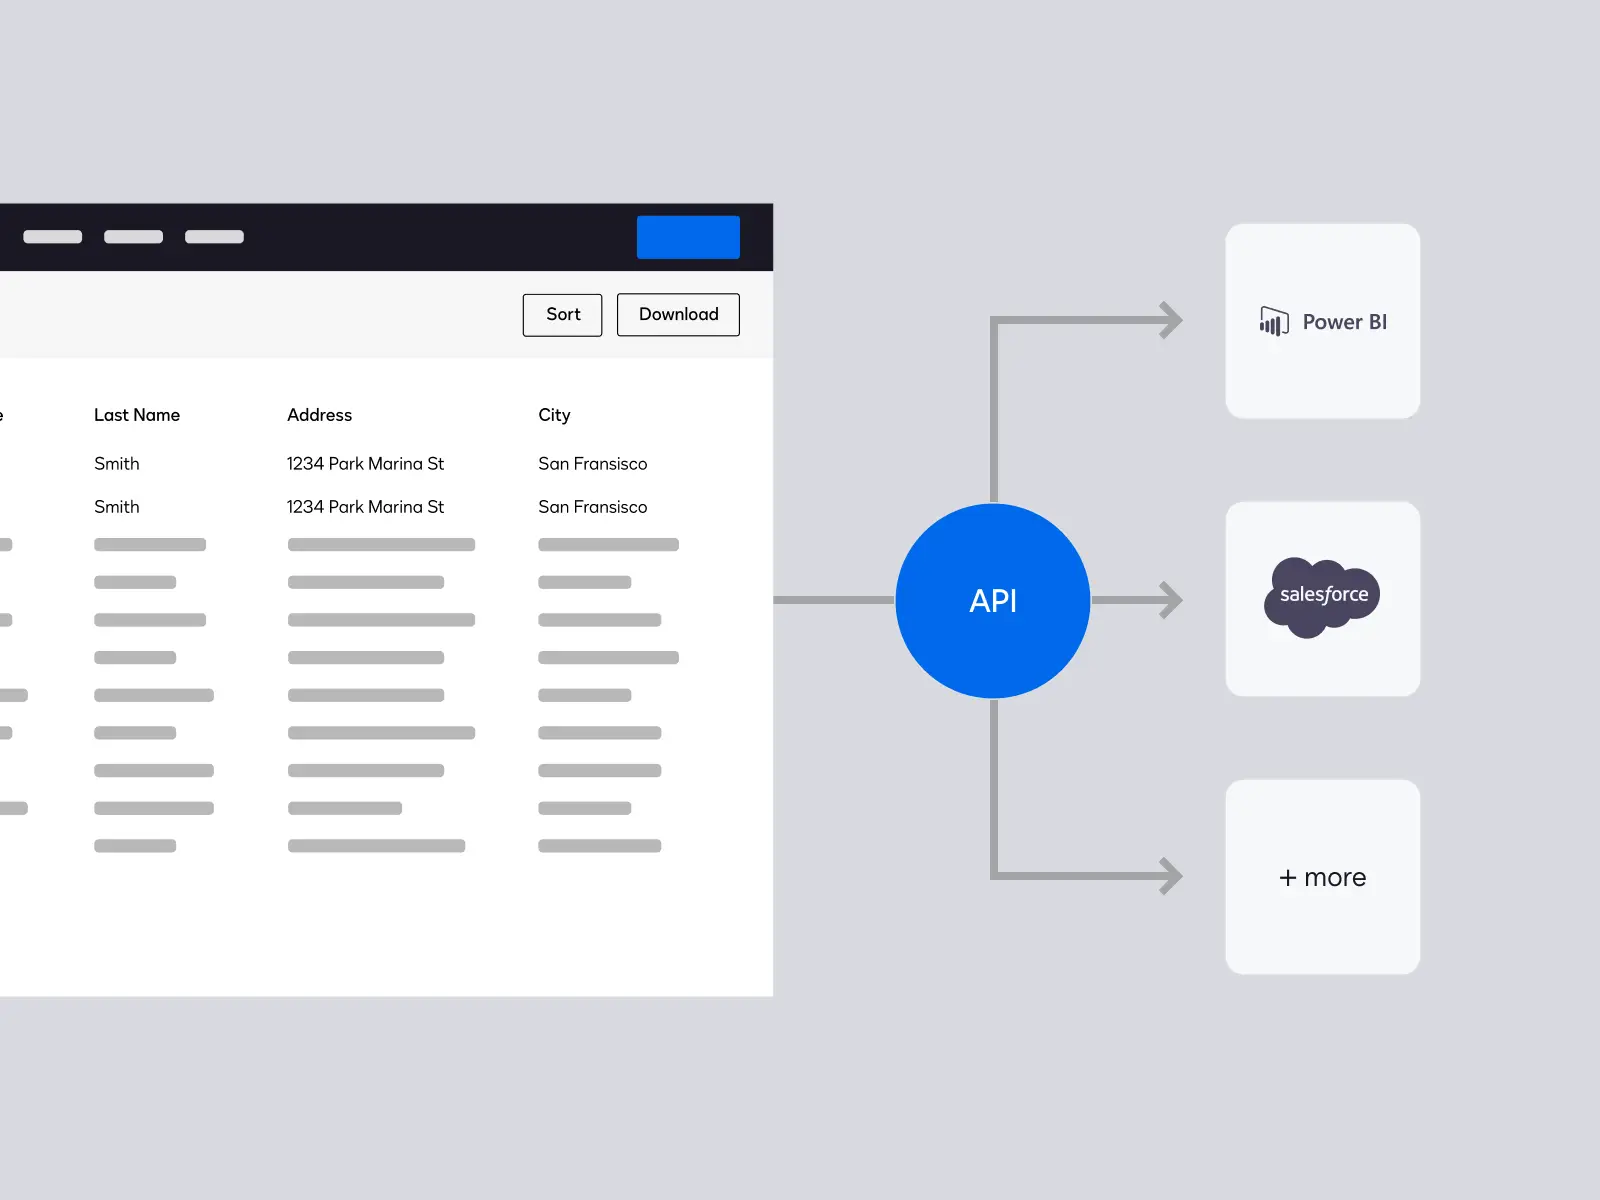 DocuSign Web Forms can connect with Salesforce, Power BI, and other business applications through an API.